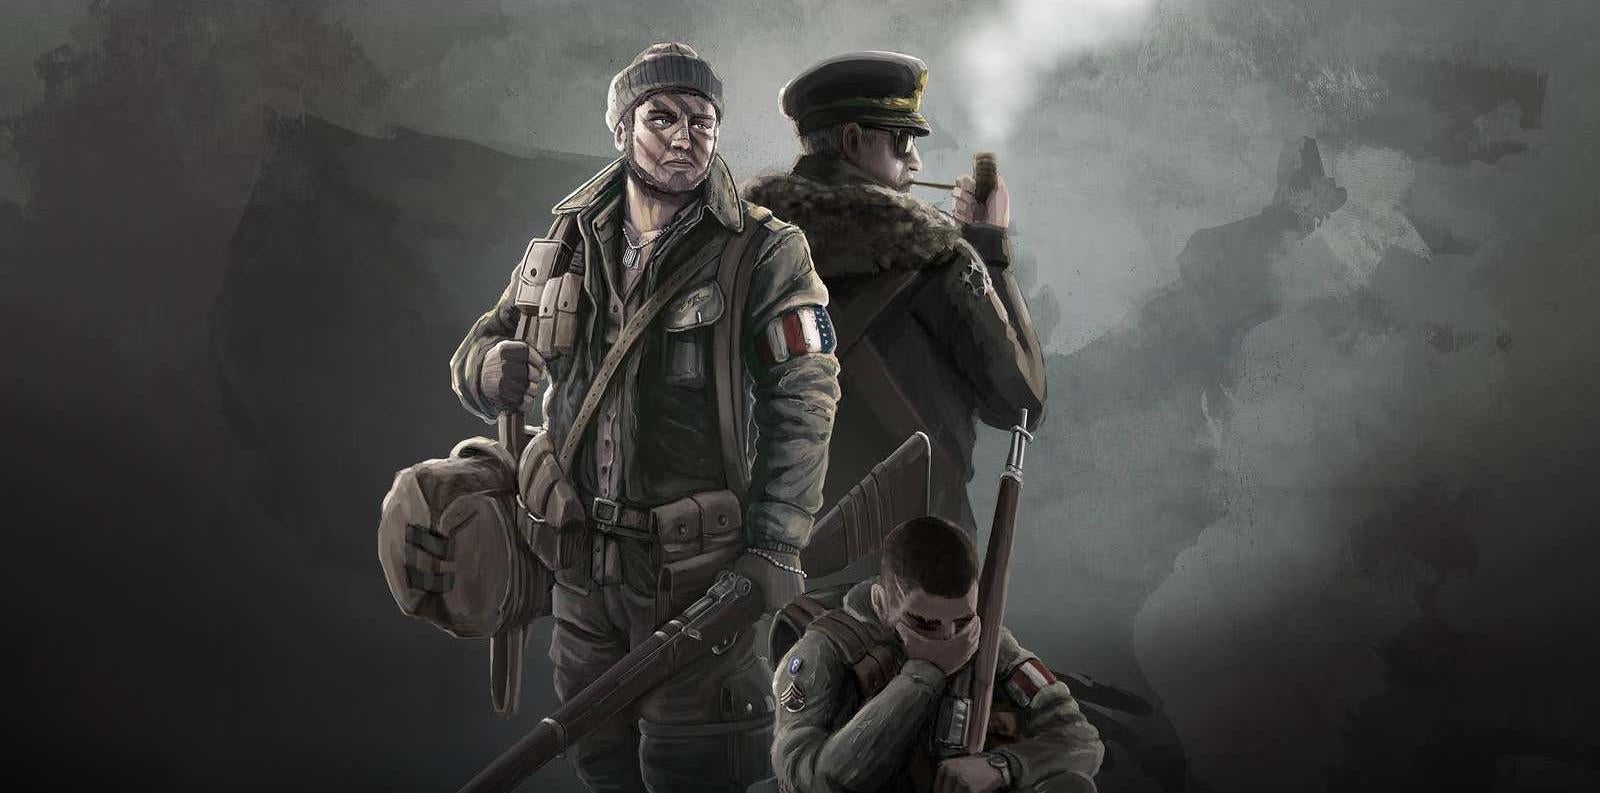 Some custom art from the Kaiserreich mod, depicting one of the factions from the Second American Civil War (Image: Kaiserreich)